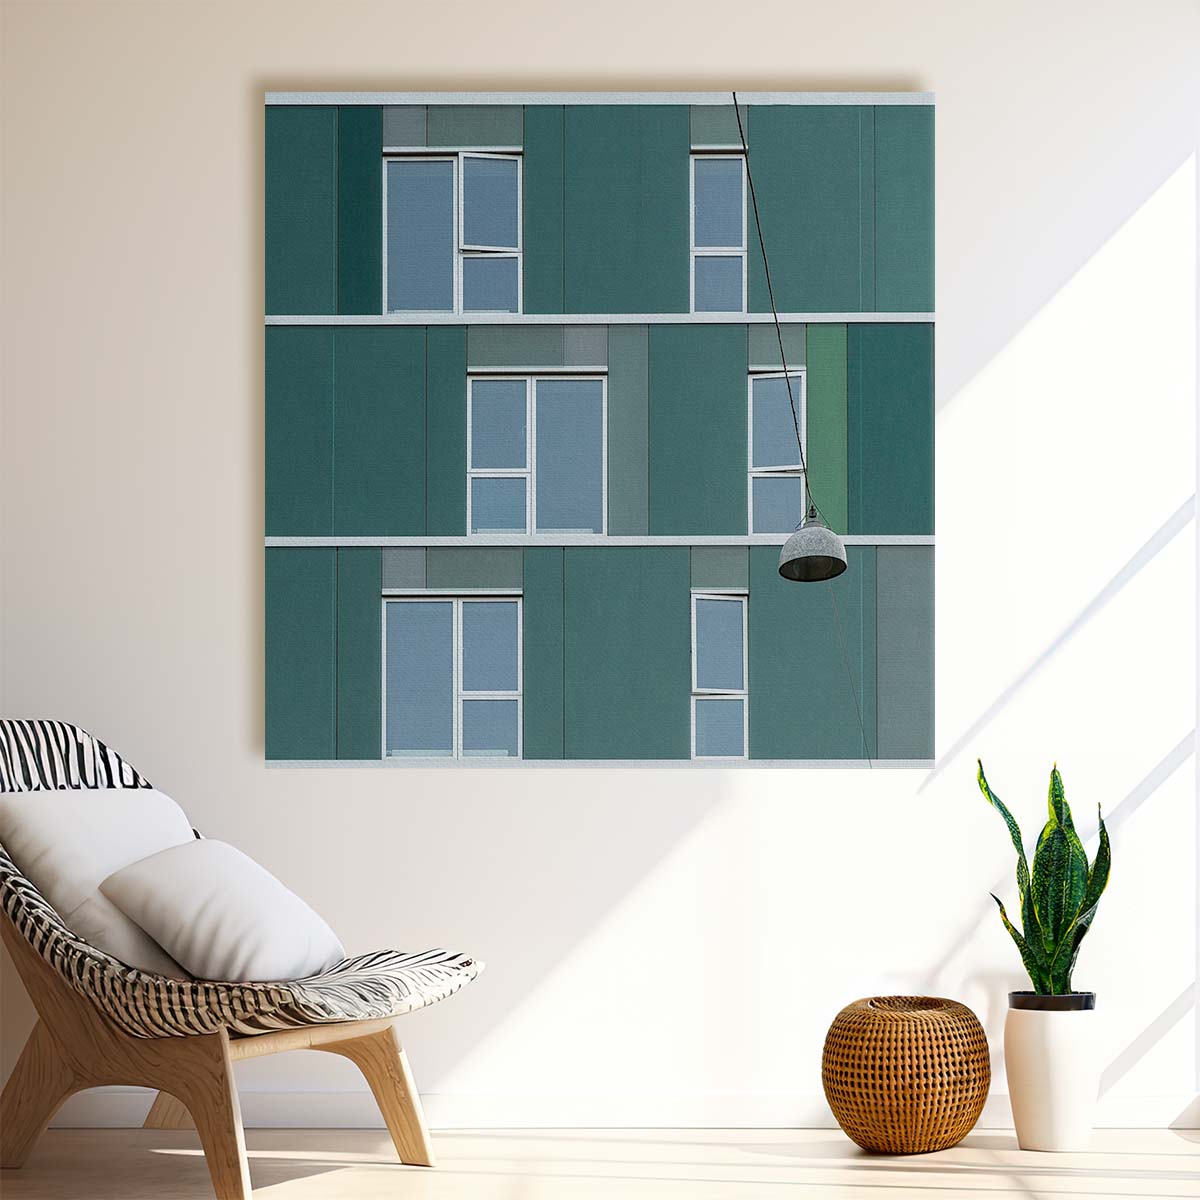 Minimalist Abstract Architecture & Street Lamp Wall Art by Luxuriance Designs. Made in USA.